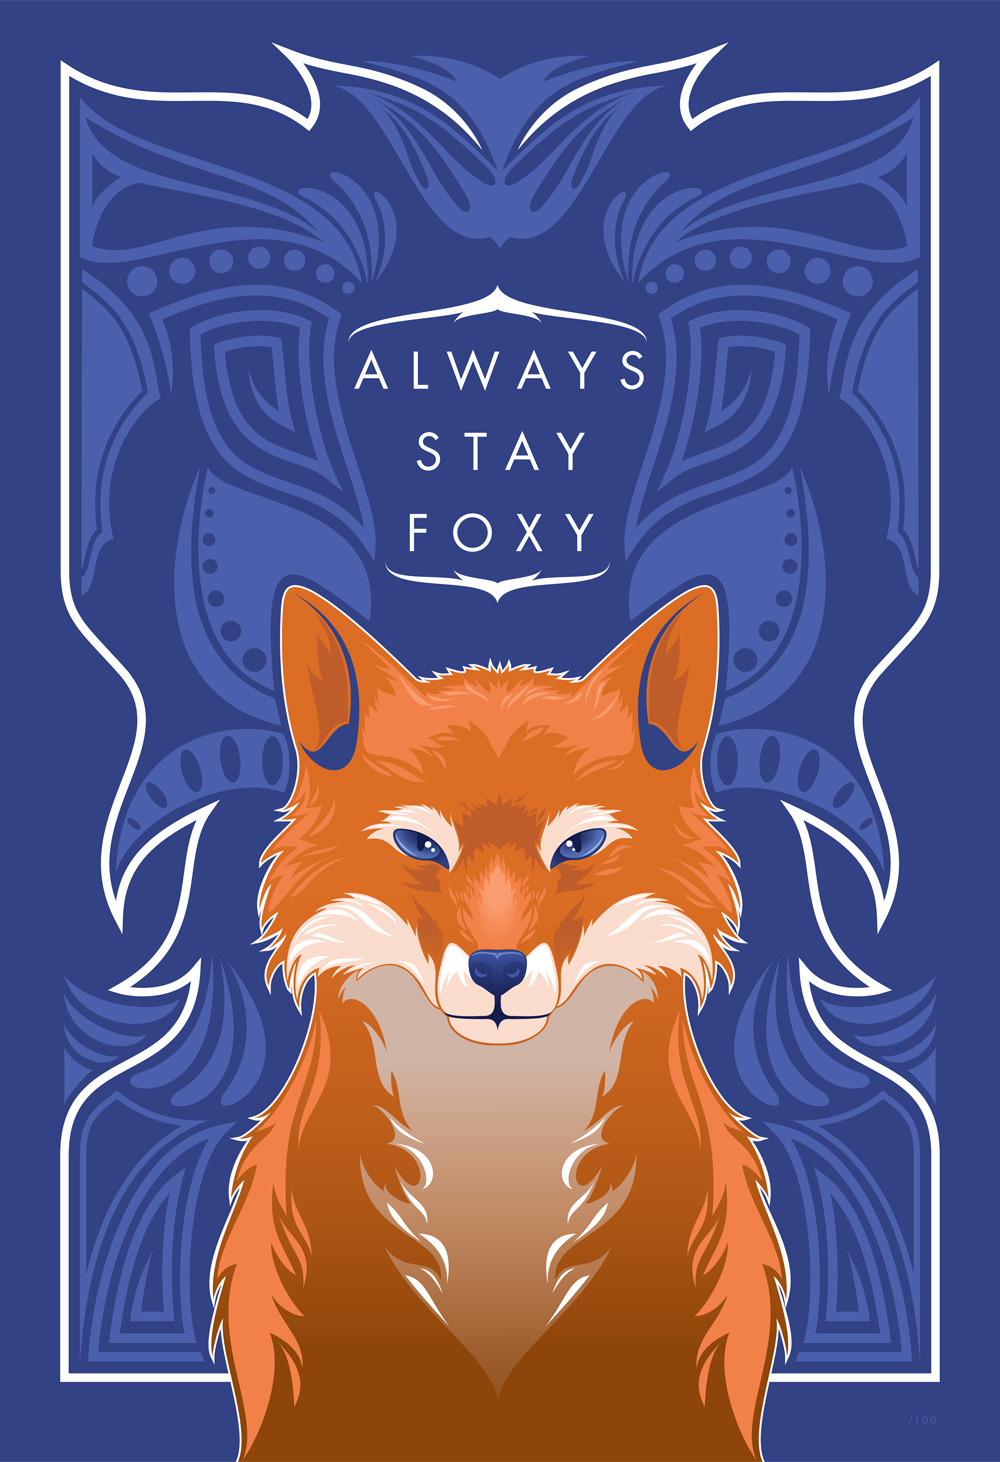 Stay Foxy by Ninjabot This print is now for sale for $20 for a 13”x19” at TheNinjabot.com Follow us on Tumblr, Twitter, Facebook, or Instagram @theninjabot